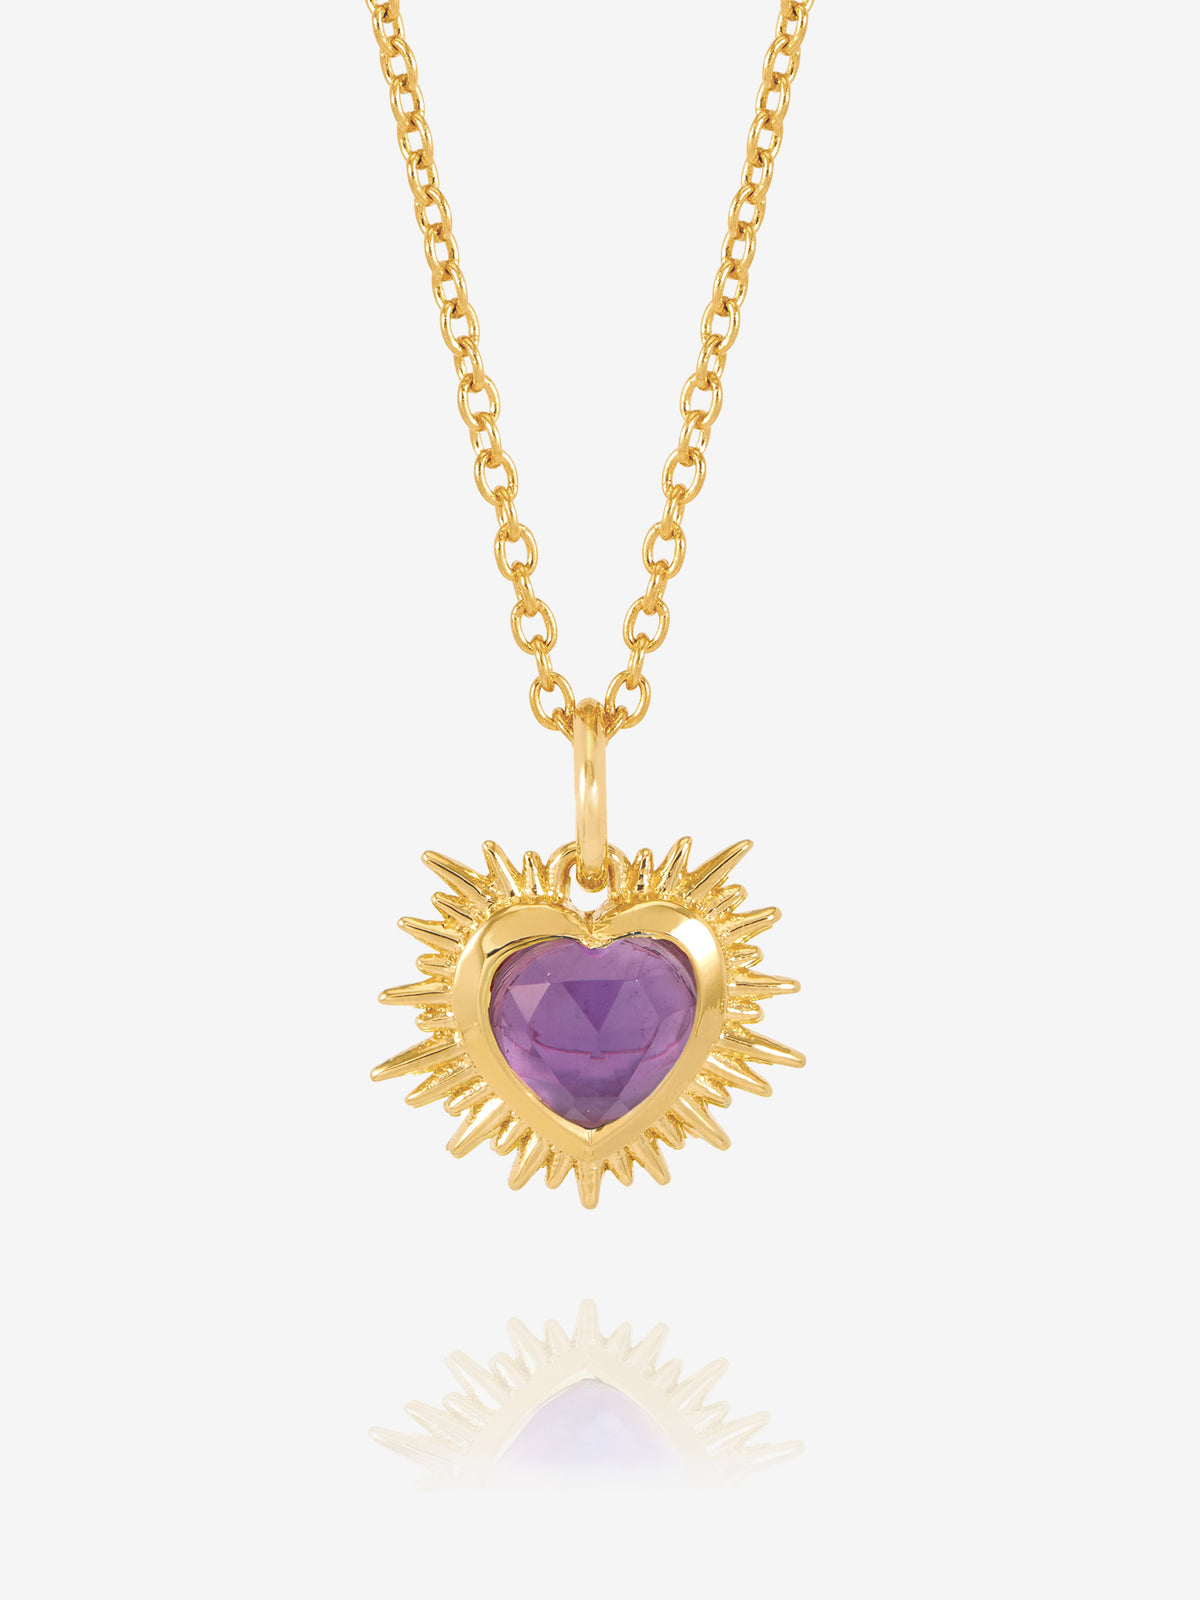 Electric Love Feburary Birthstone Heart Necklace